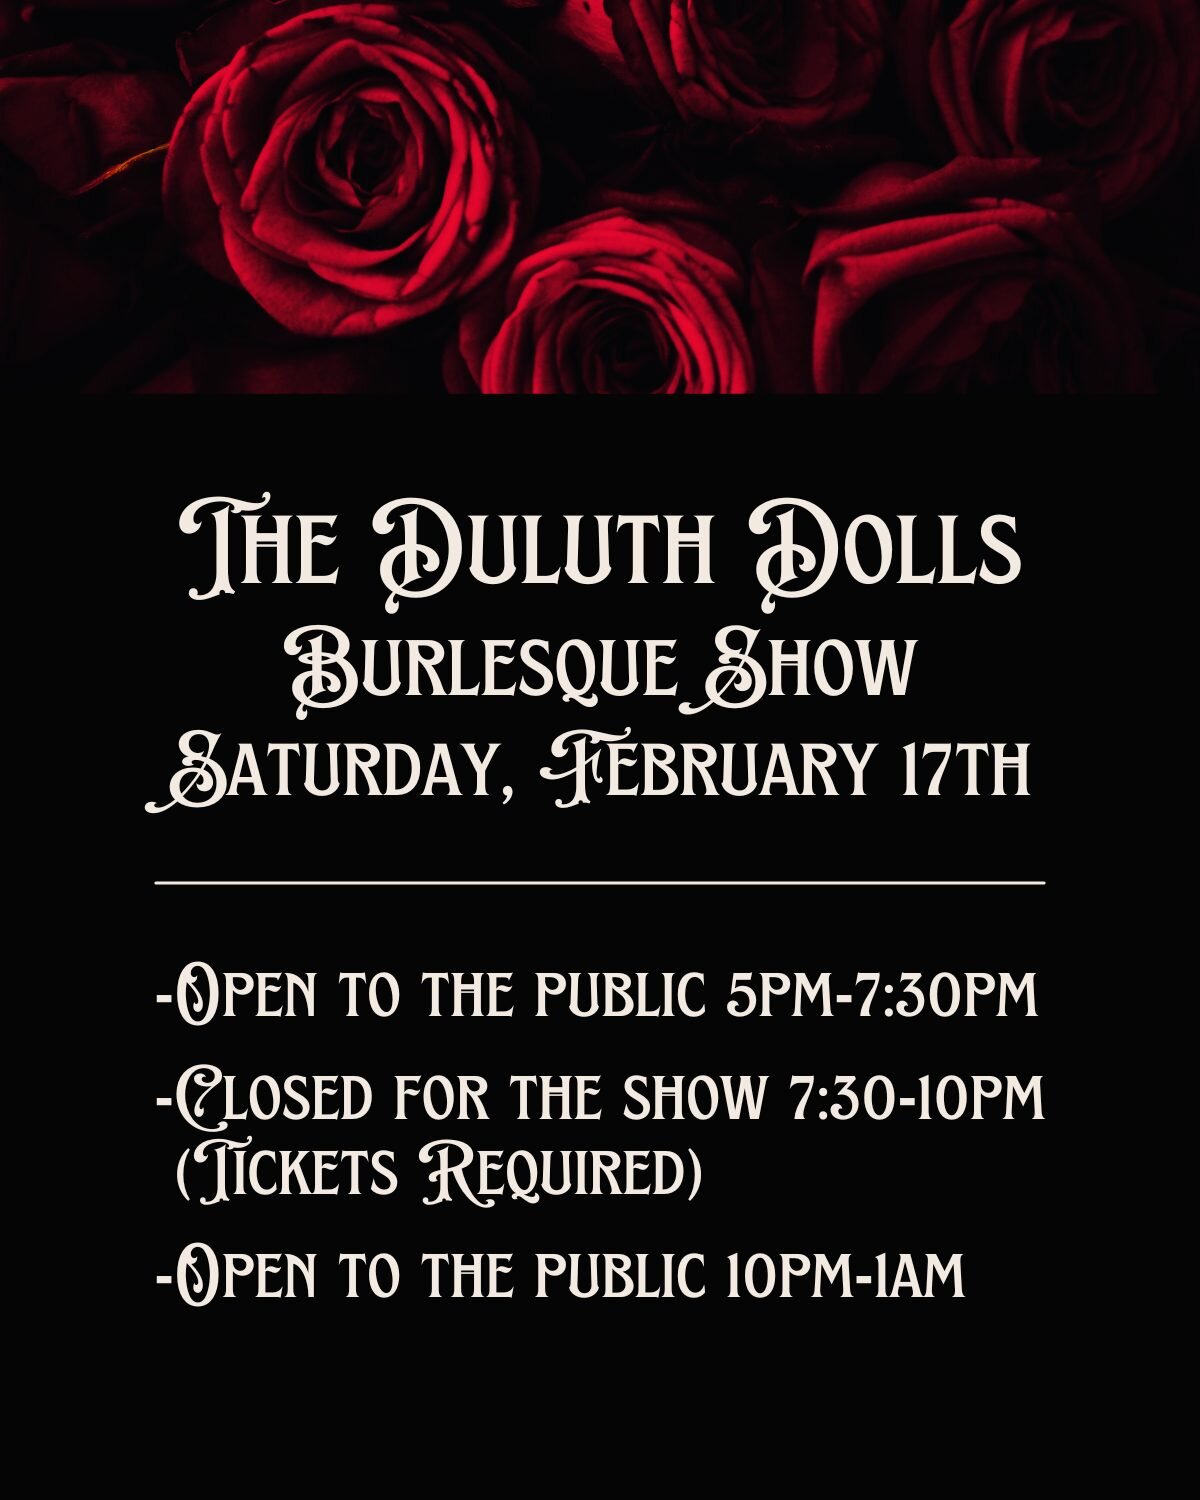 🎉🌟 TONIGHT'S THE NIGHT! 🌟🎉

Get ready to be dazzled and delighted because the Duluth Dolls are bringing their sizzling burlesque show to The Rathskeller speakeasy! 💃✨ Join us for an evening of Love &amp; Lust as the Dolls take the stage at 8pm s